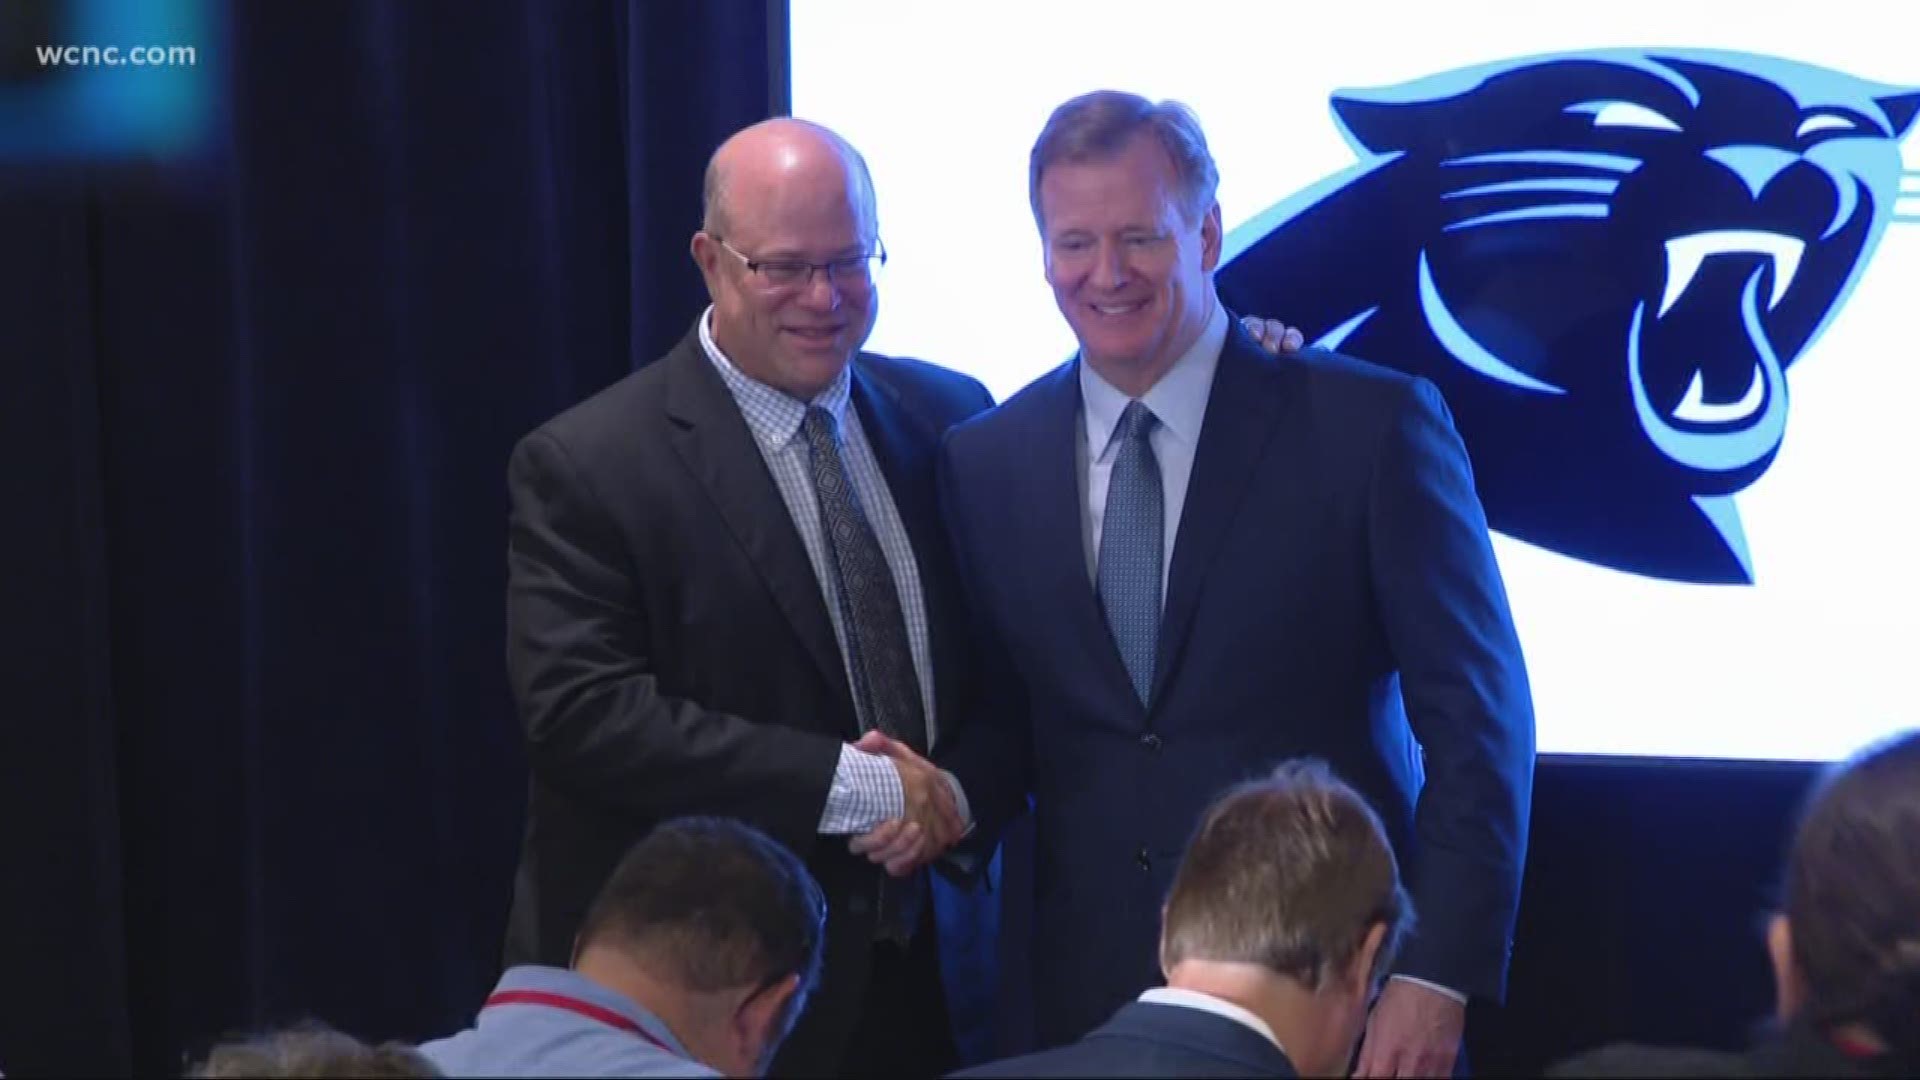 It's a done deal. David Tepper is officially the owner of the Carolina Panthers.